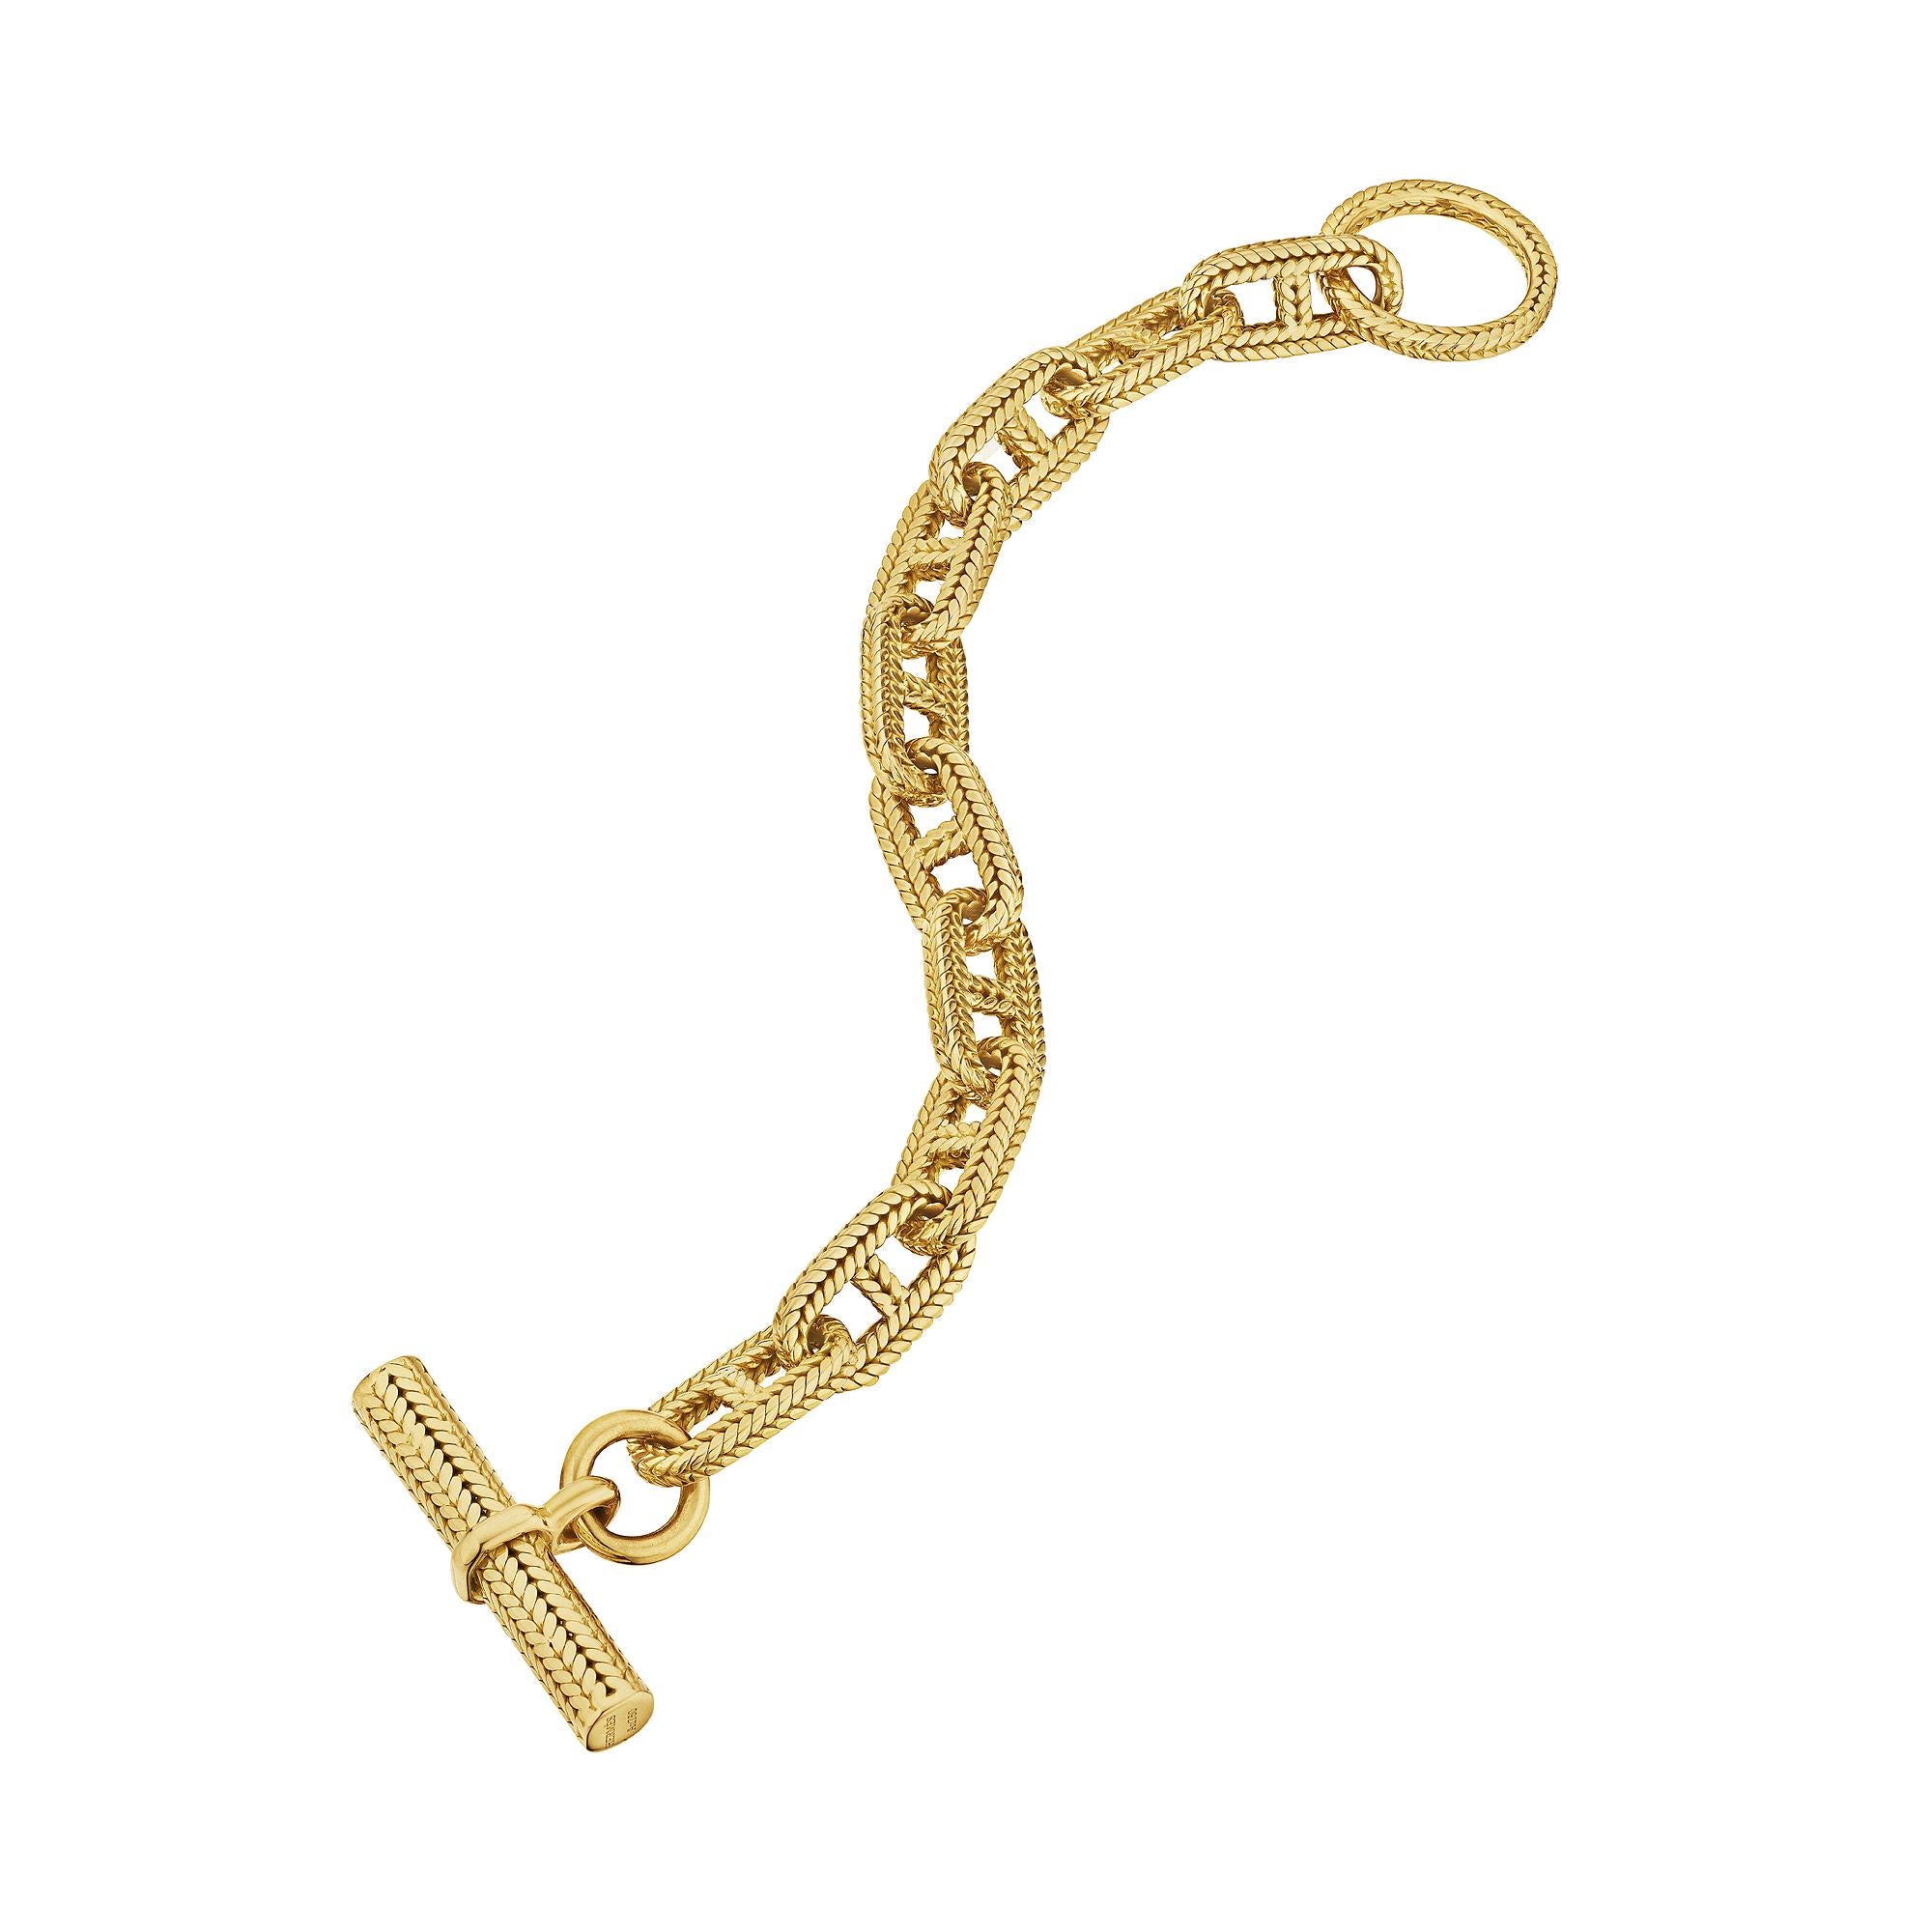 Crisp and well executed this rare large size Hermes Georges L'Enfant Paris 'chaine d'ancre' vintage toggle link bracelet is the statement piece you have been searching for. With ten handmade links, this woven herringbone 18 karat yellow gold